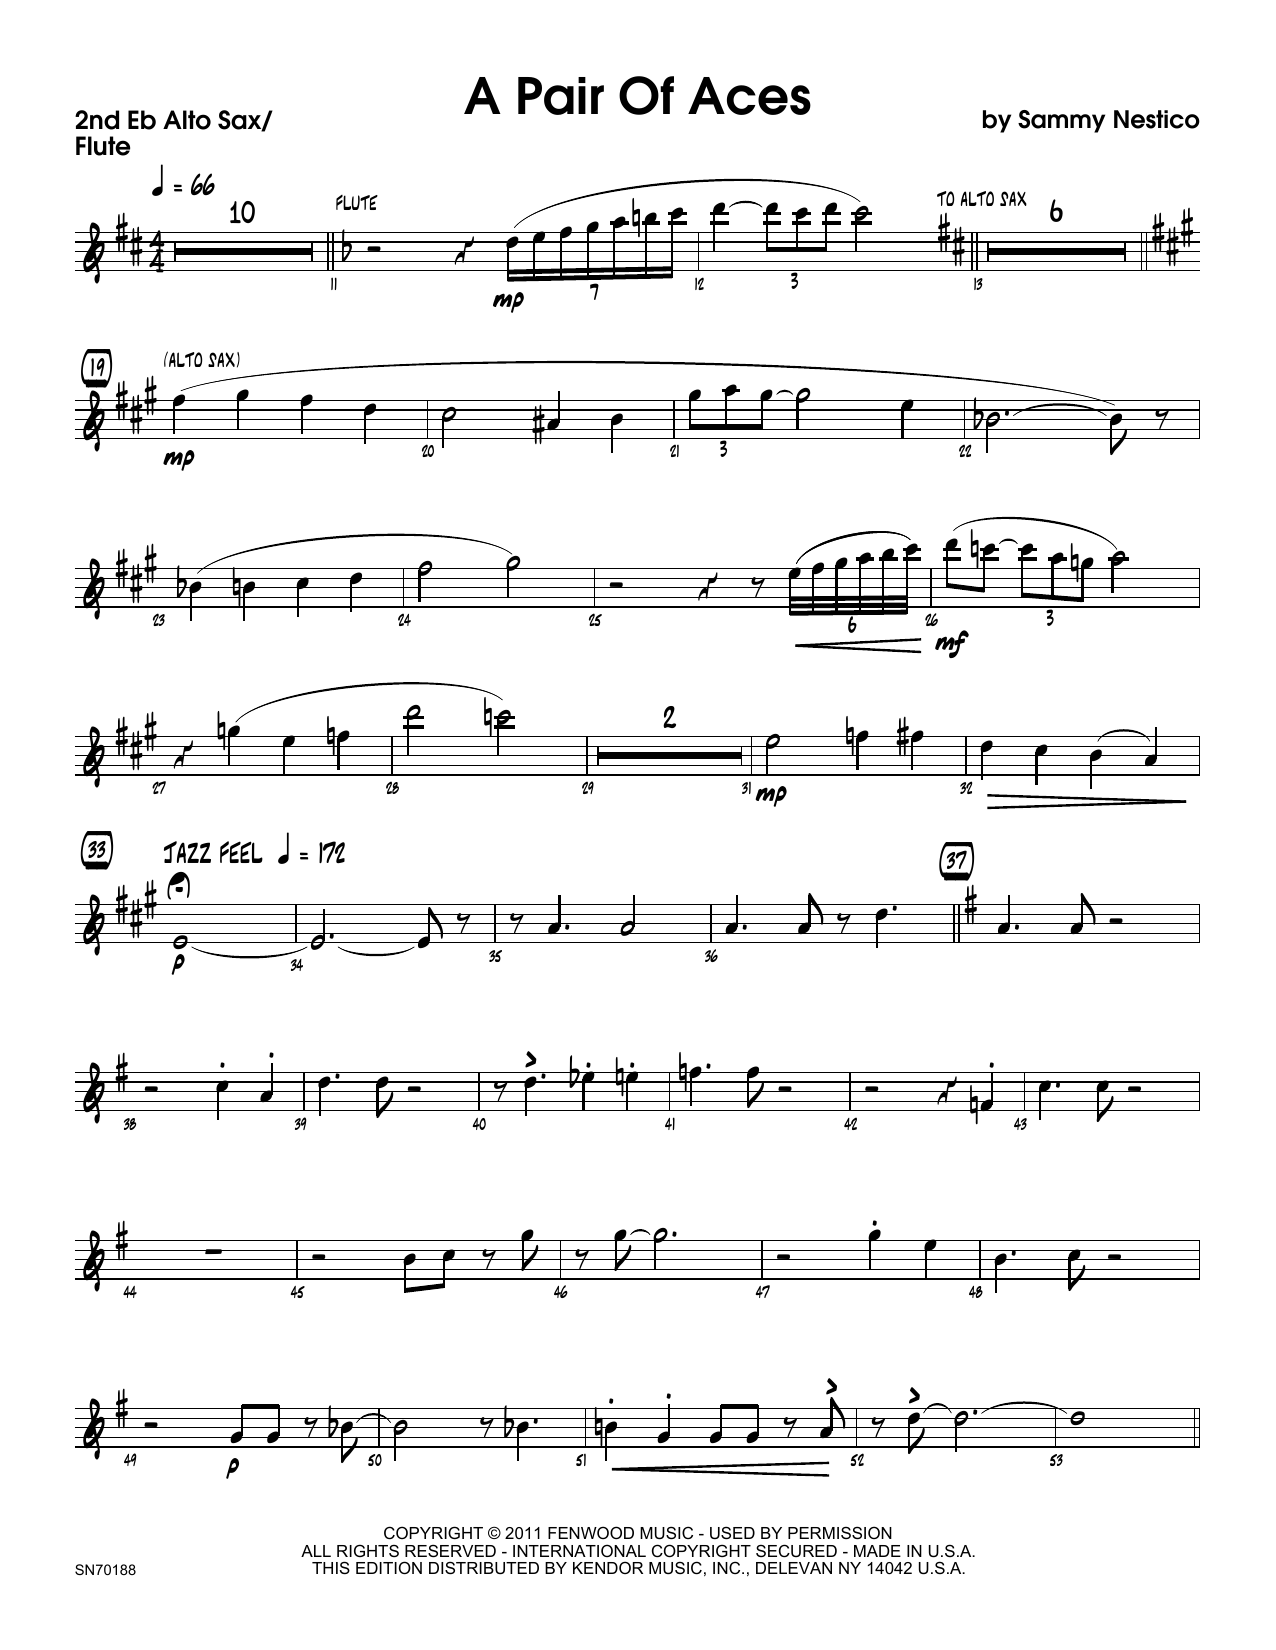 Download Sammy Nestico A Pair Of Aces - 2nd Eb Alto Saxophone Sheet Music